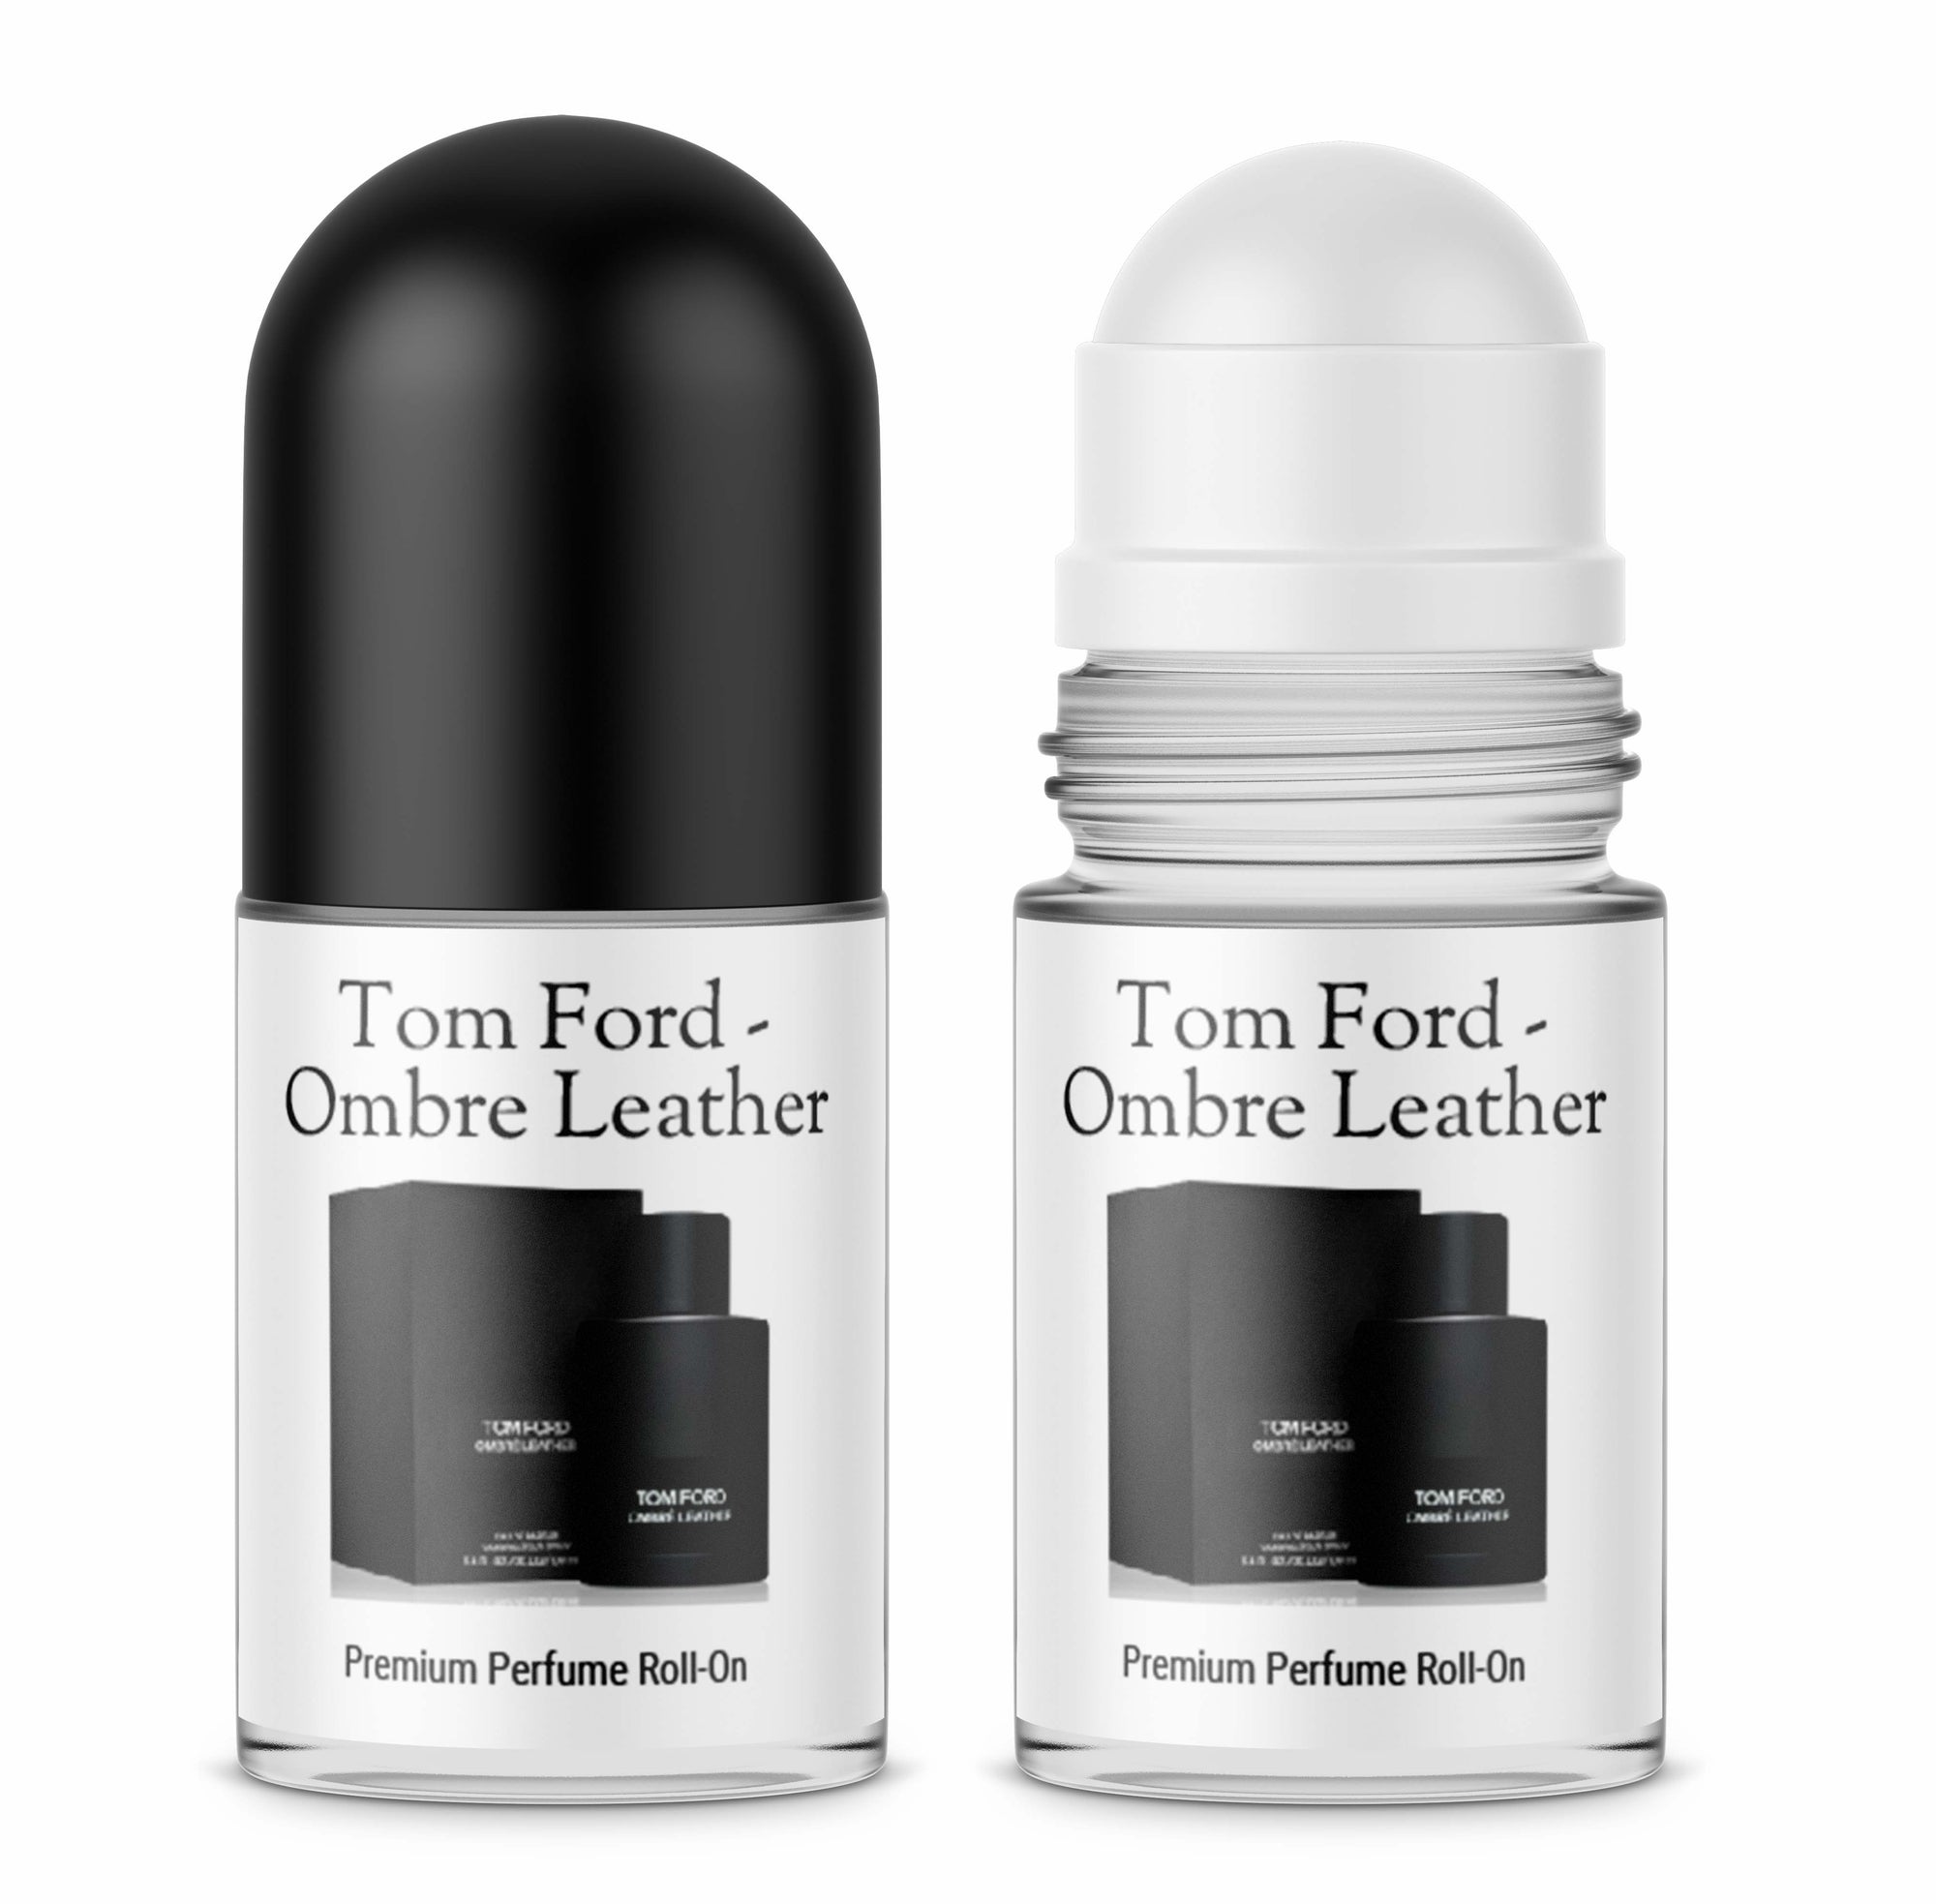 Tom Ford Ombre Leather Roll On Perfume Oil